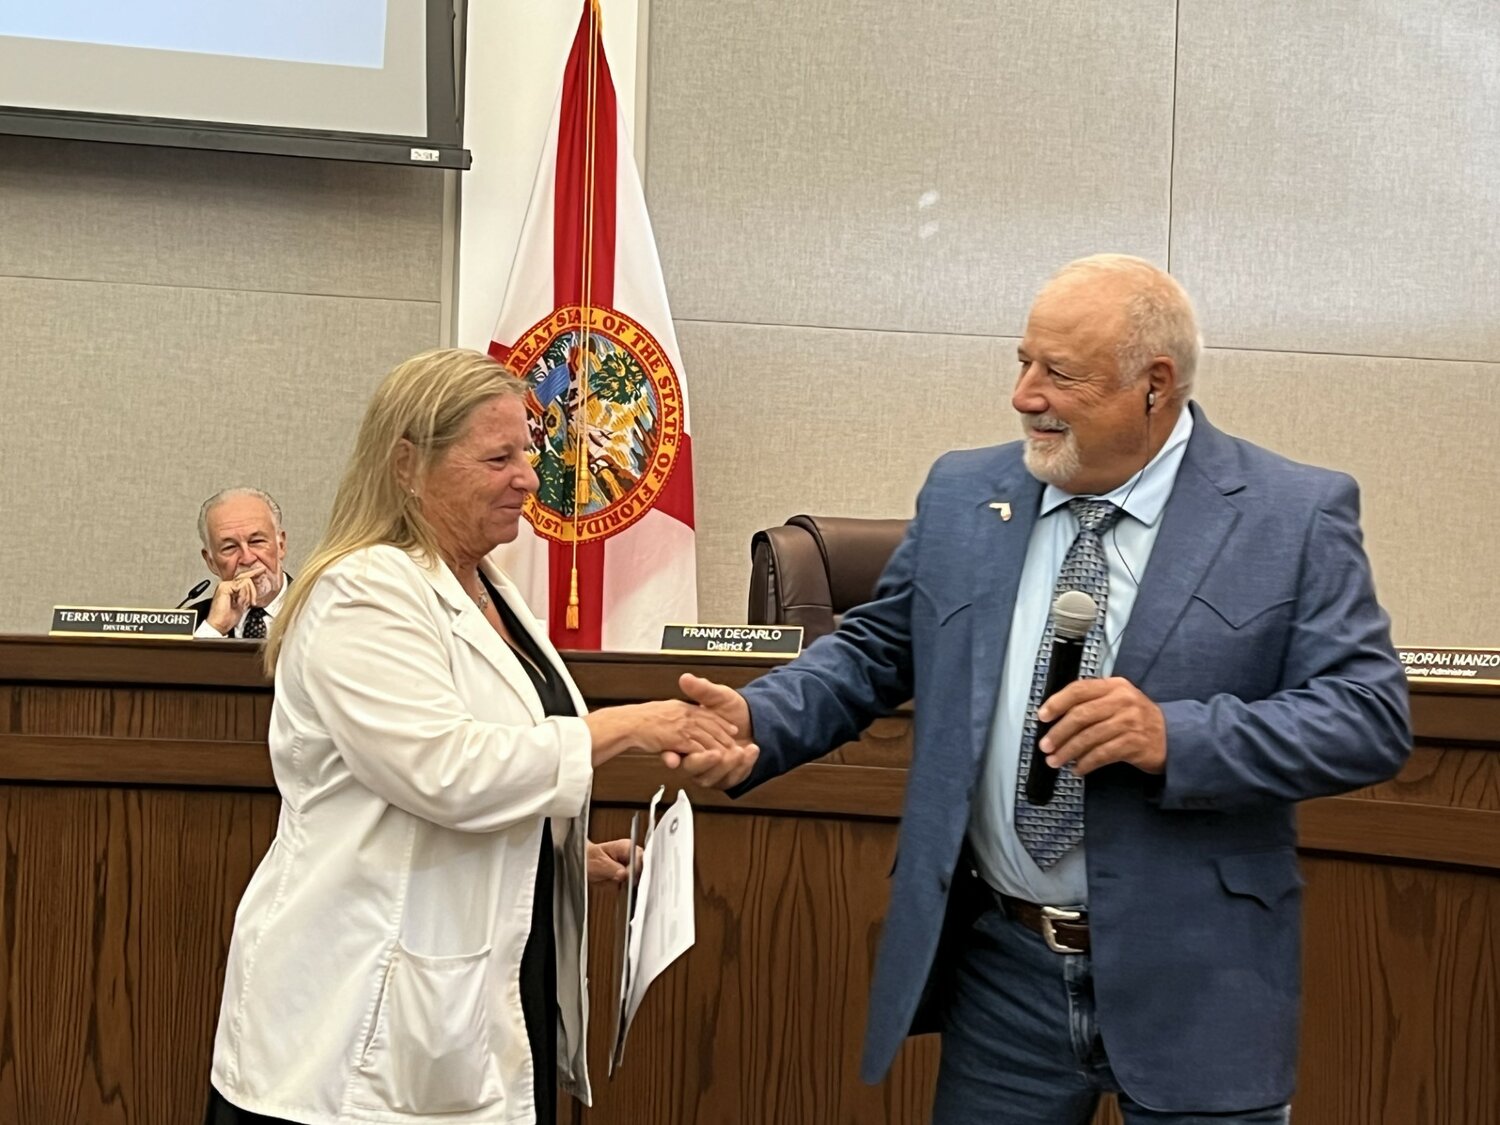 OKEECHOBEE -- Terri Pinder, Southeast Region Director, and long-term active member of the Florida Nurses Association, accepted the Nurse Practitioner Month proclamation at the Nov. 9 Okeechobee County Commission meeting.